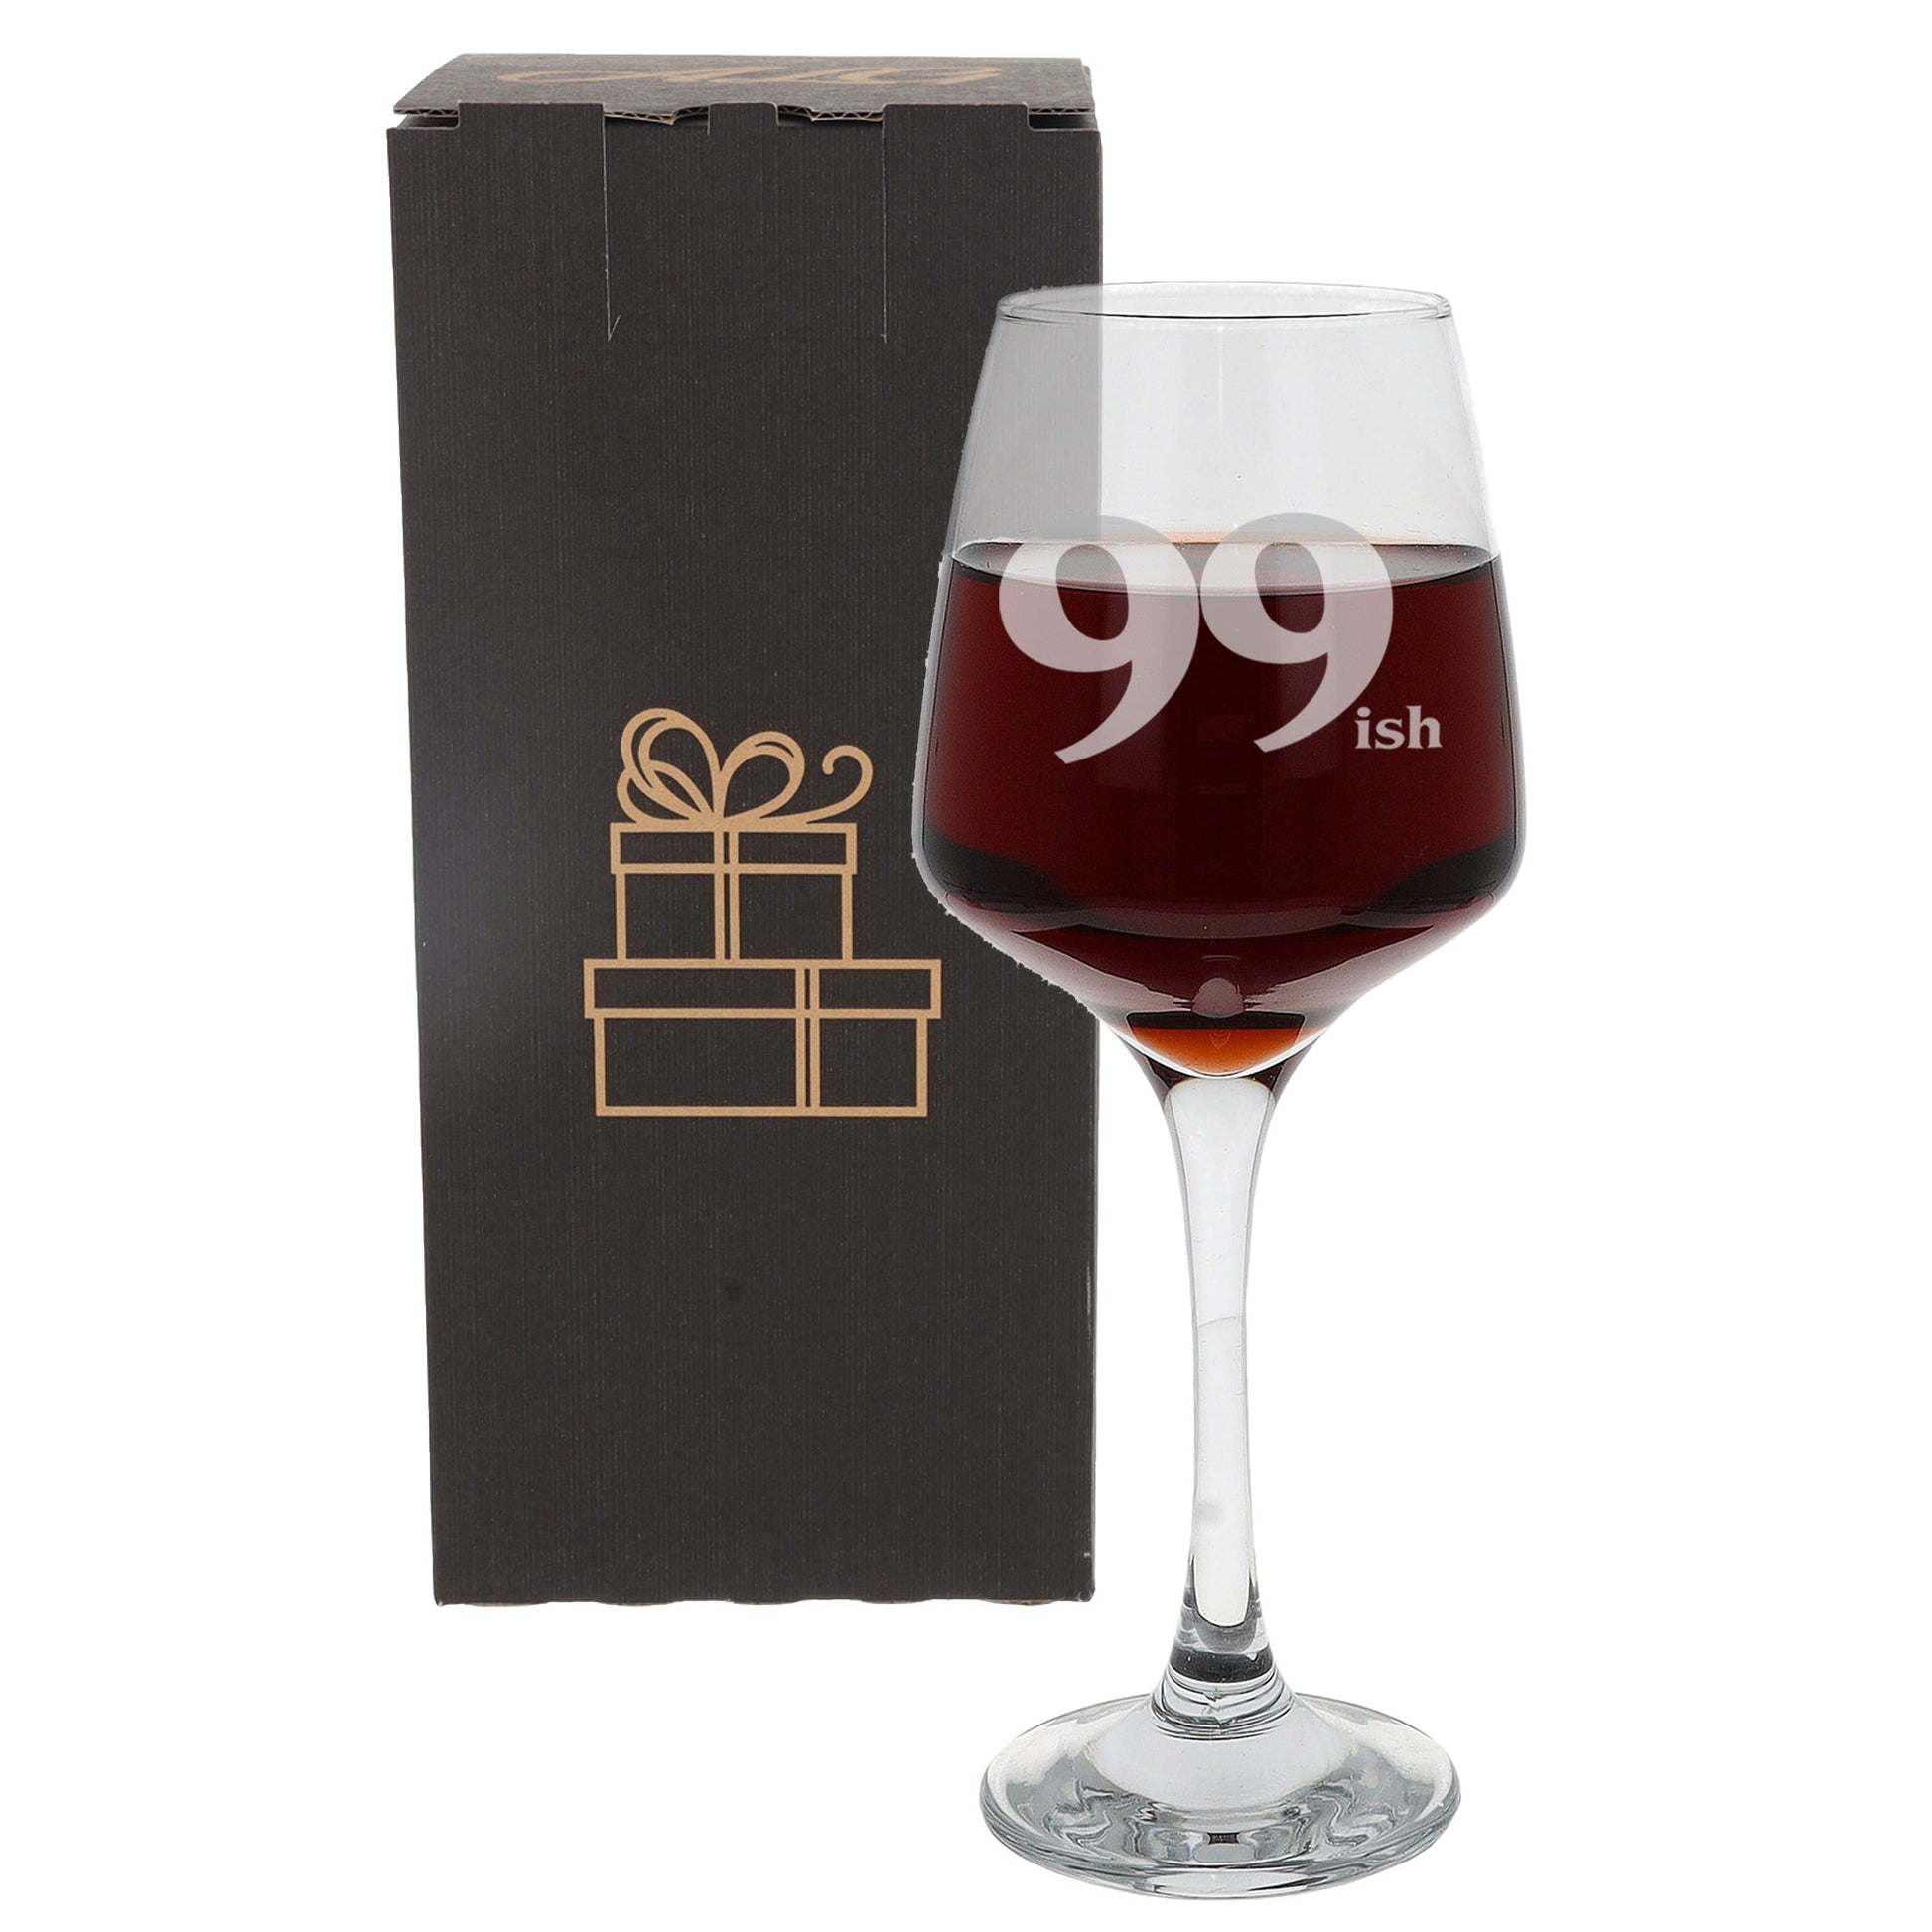 99ish Wine Glass and/or Coaster Set  - Always Looking Good -   